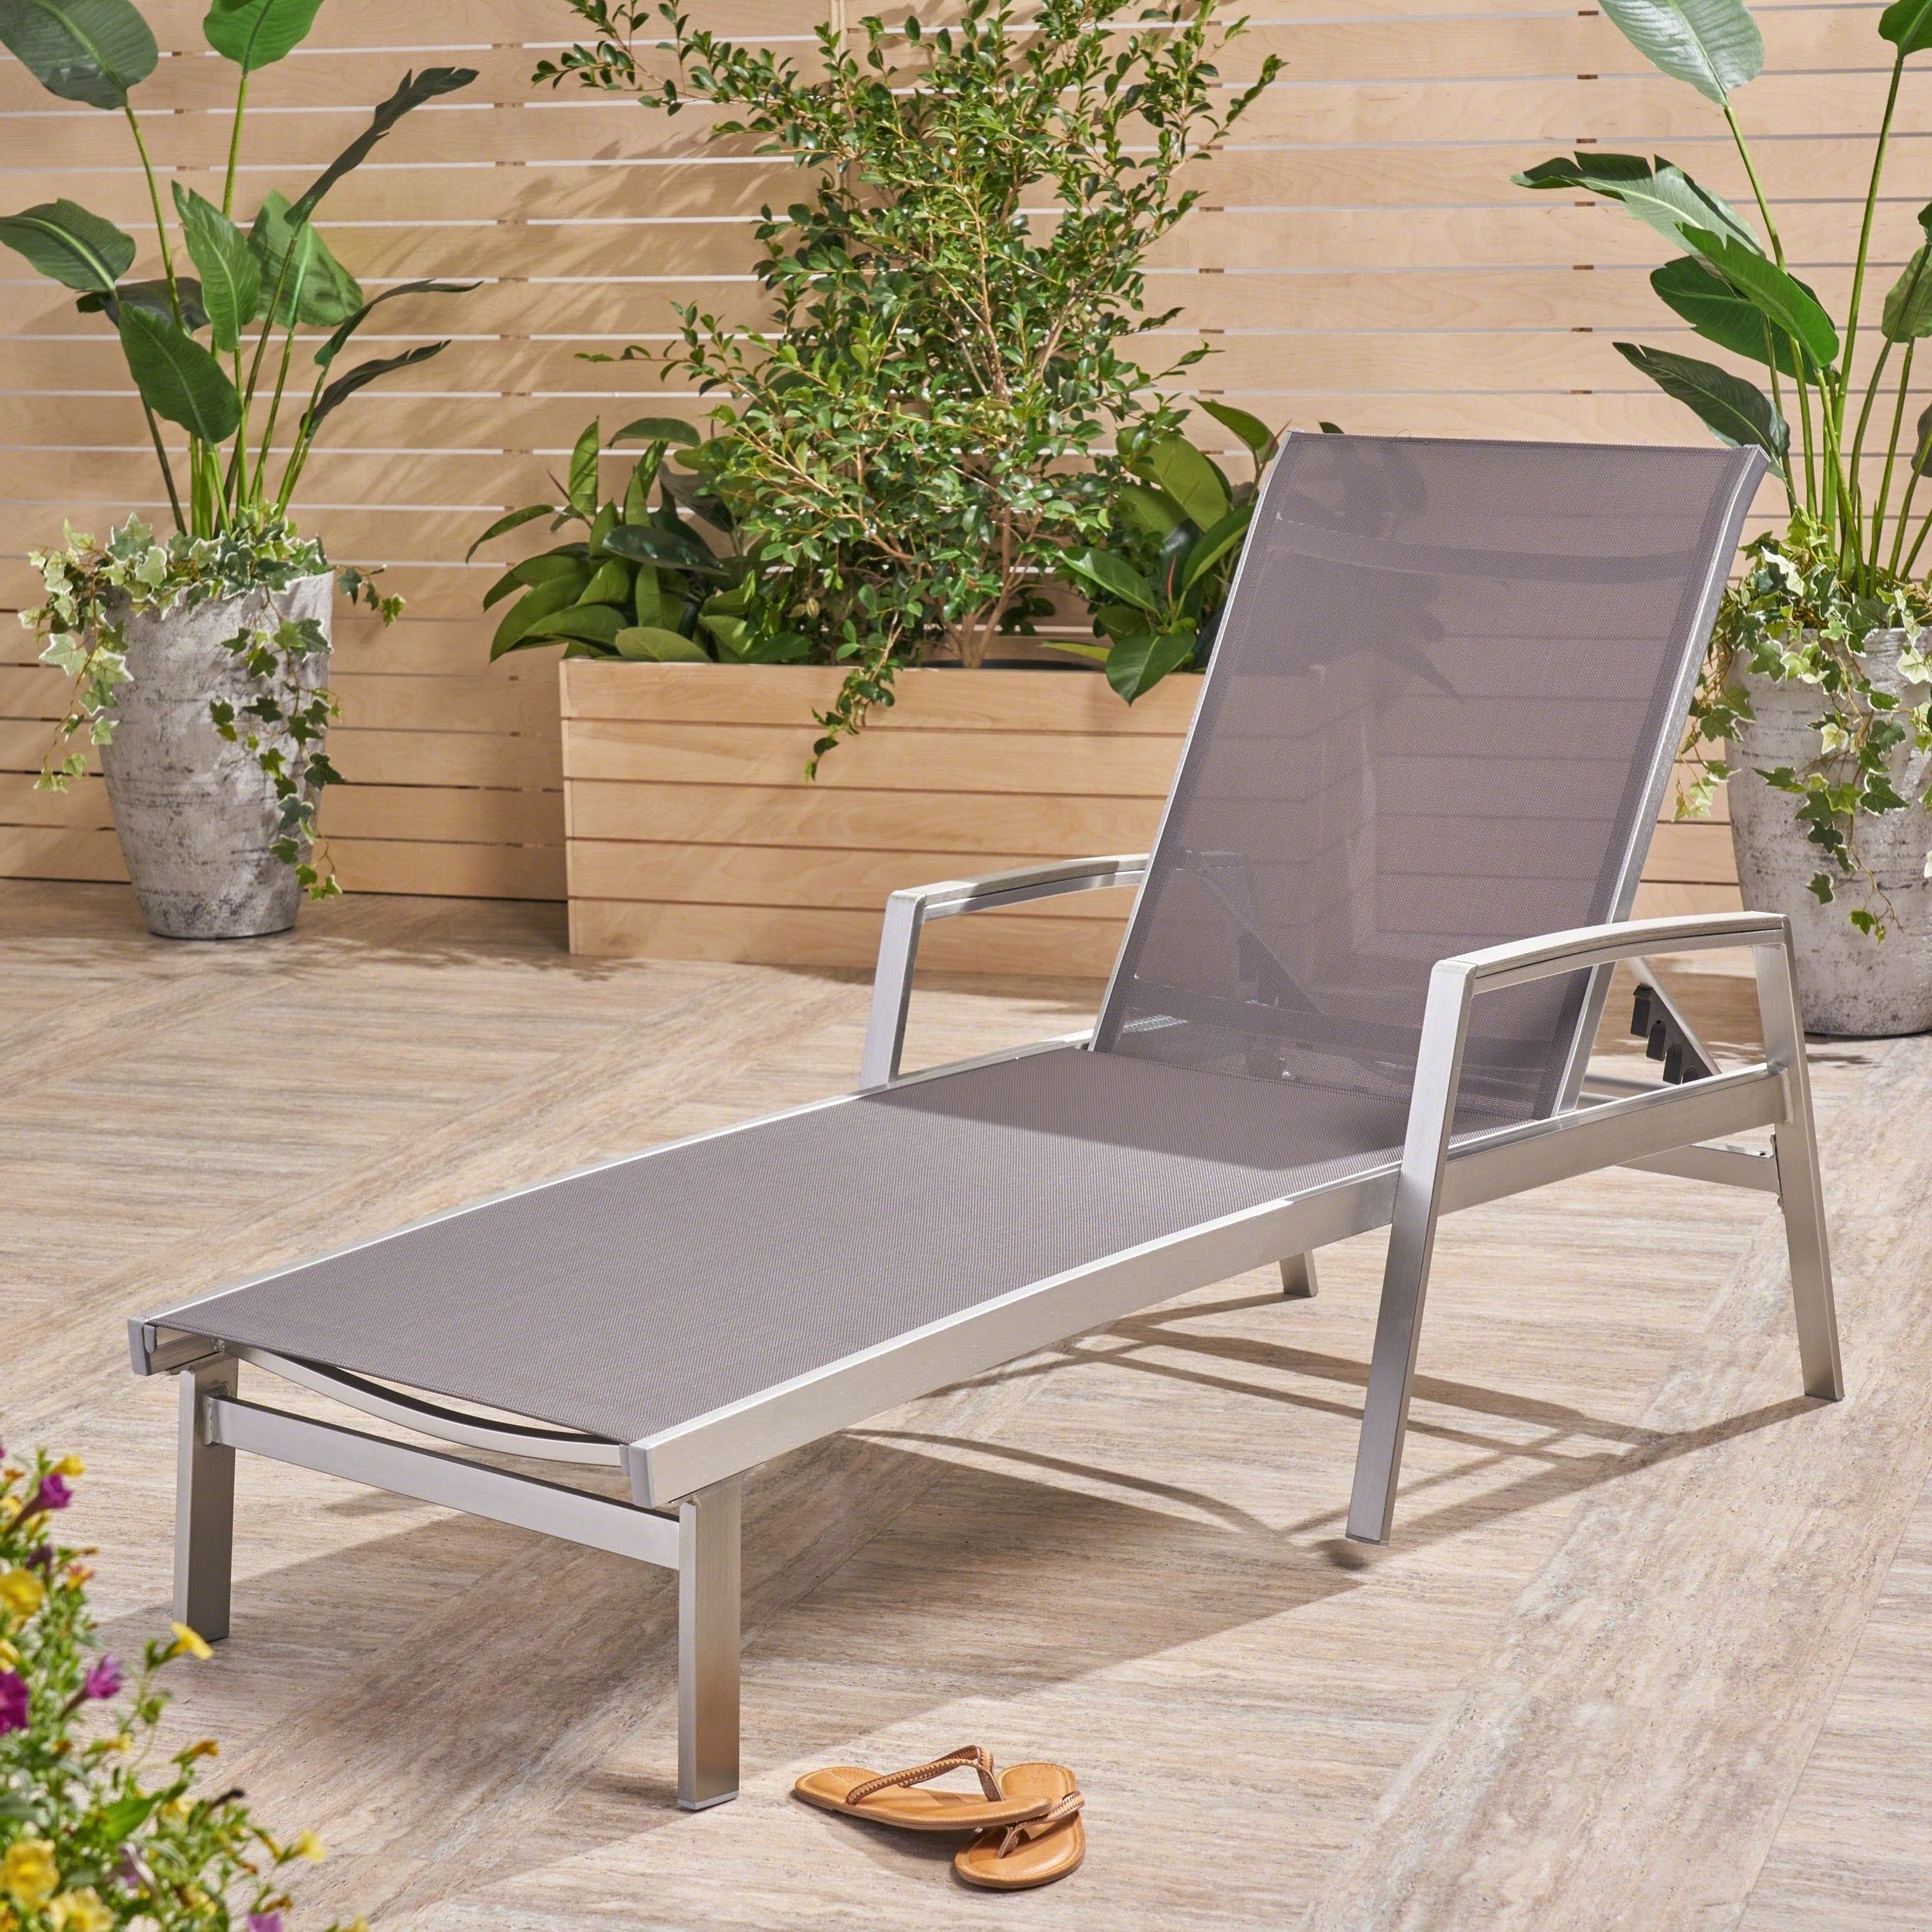 2019 Oxton Outdoor Aluminum Chaise Loungechristopher Knight Home Regarding Outdoor Aluminum Chaise Lounges (View 2 of 25)